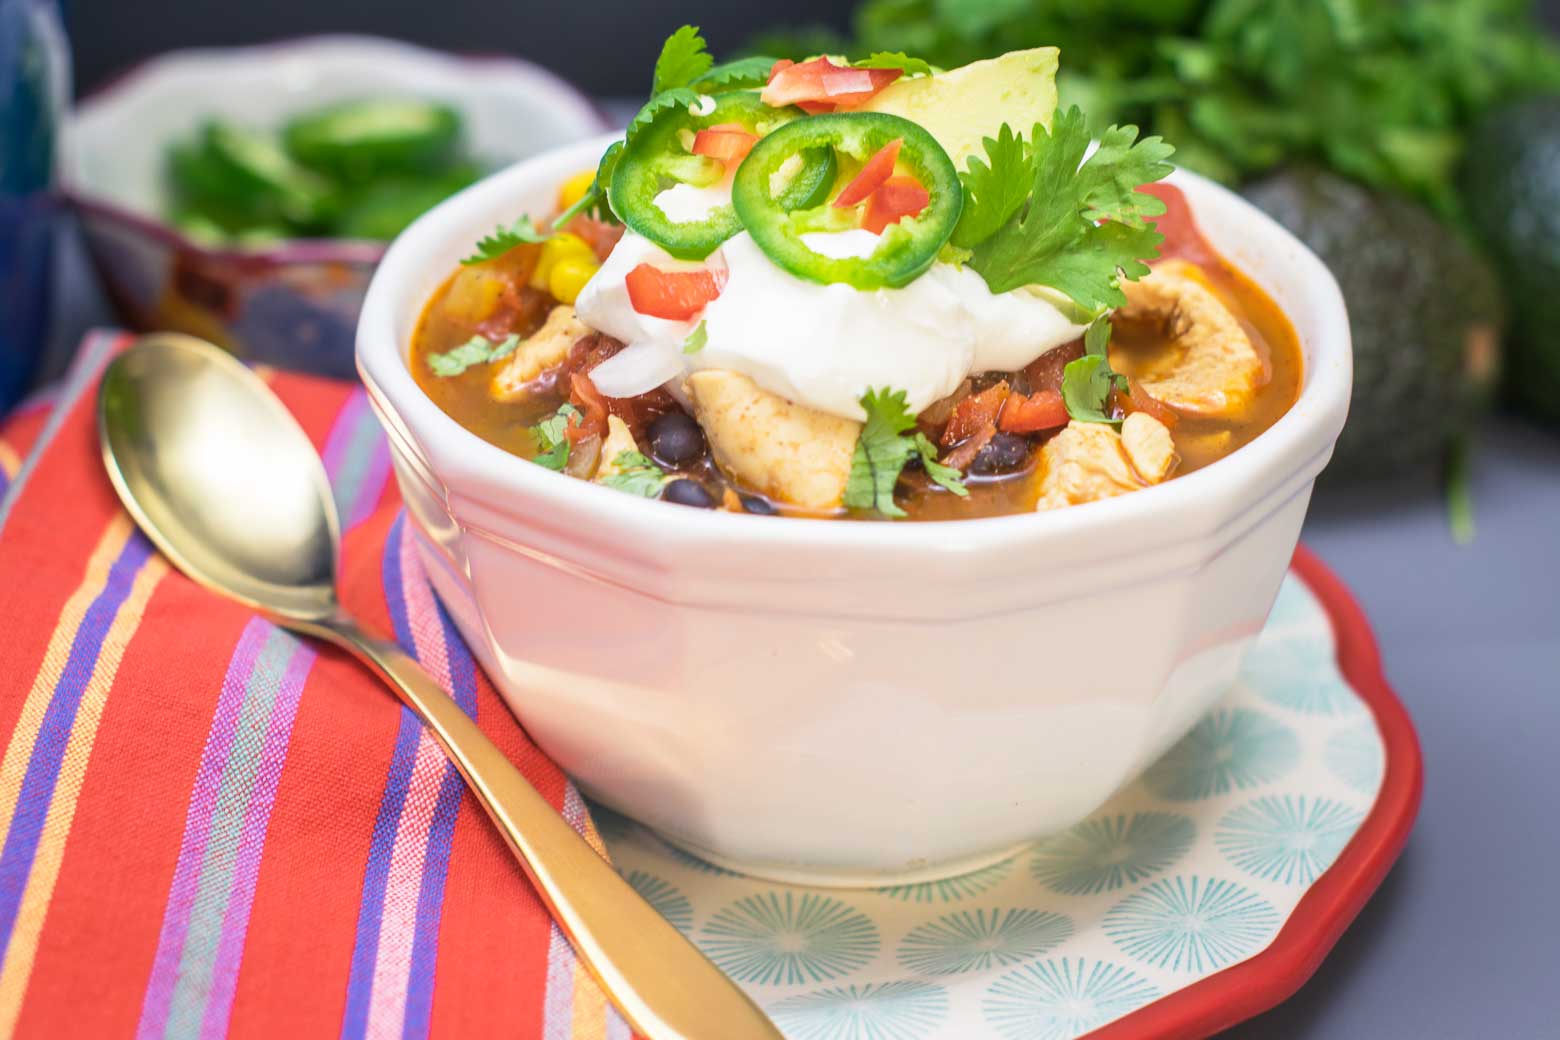 This chicken chili recipe is packed with protein and veggies